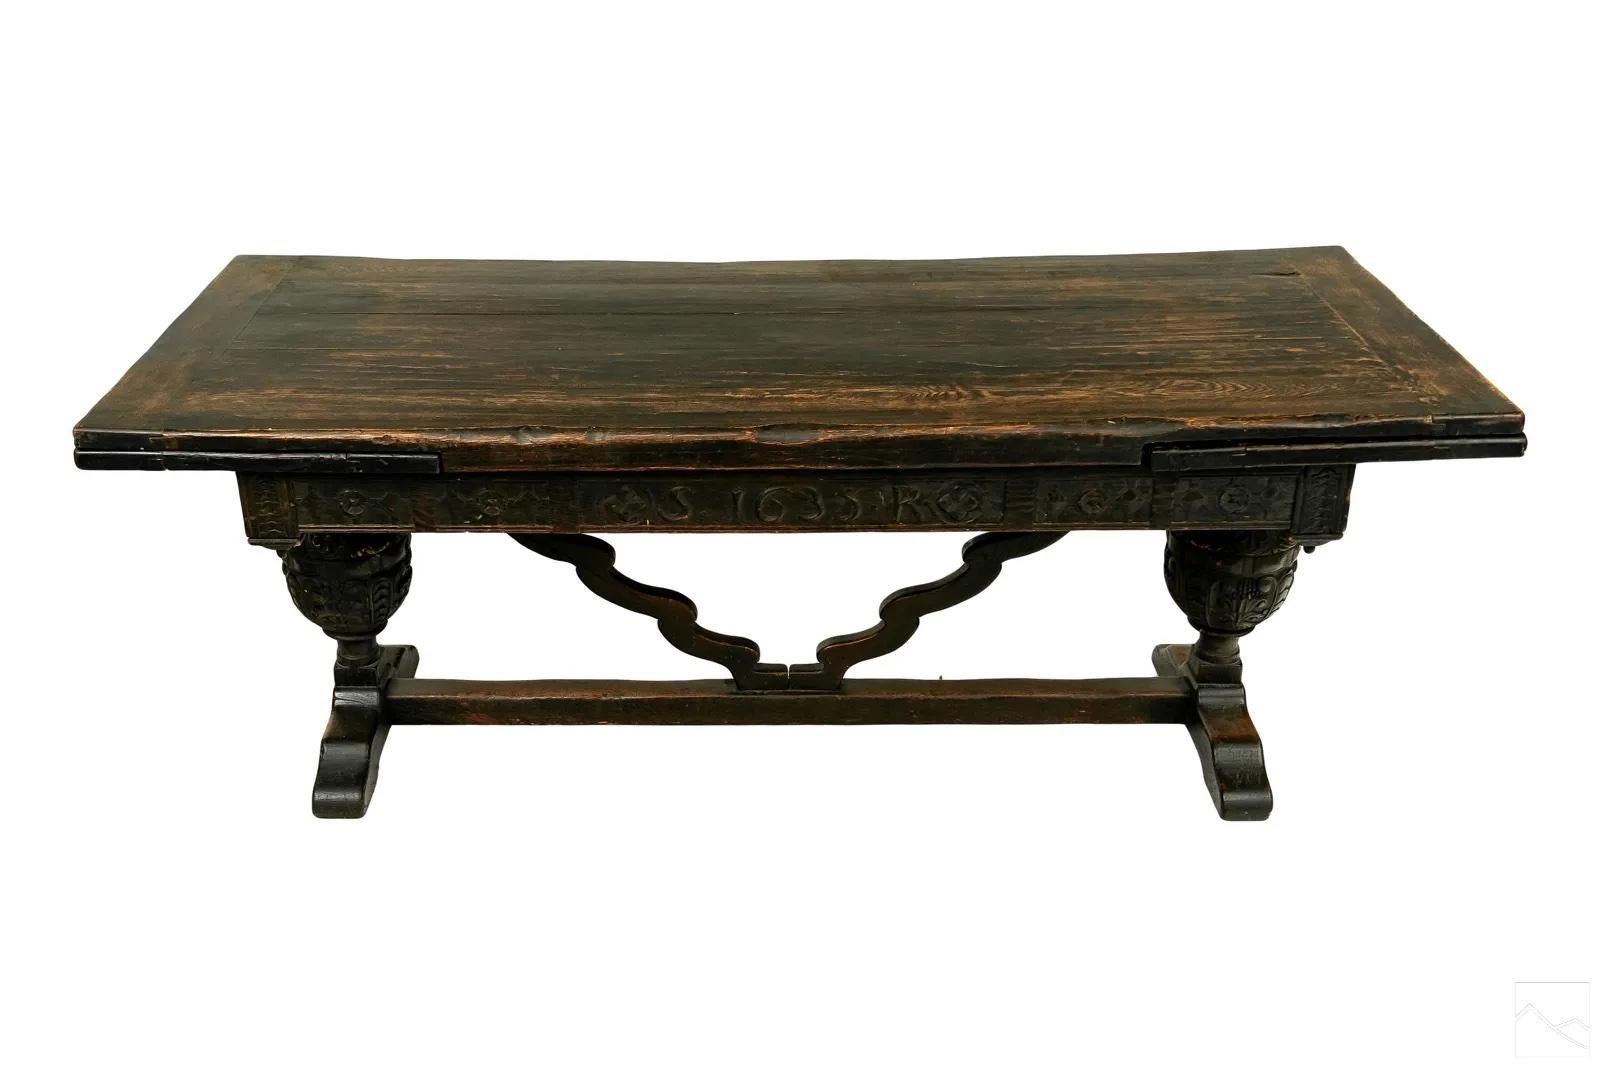 Oak Early 17th Century English Jacobean Refectory or Withdraw Table